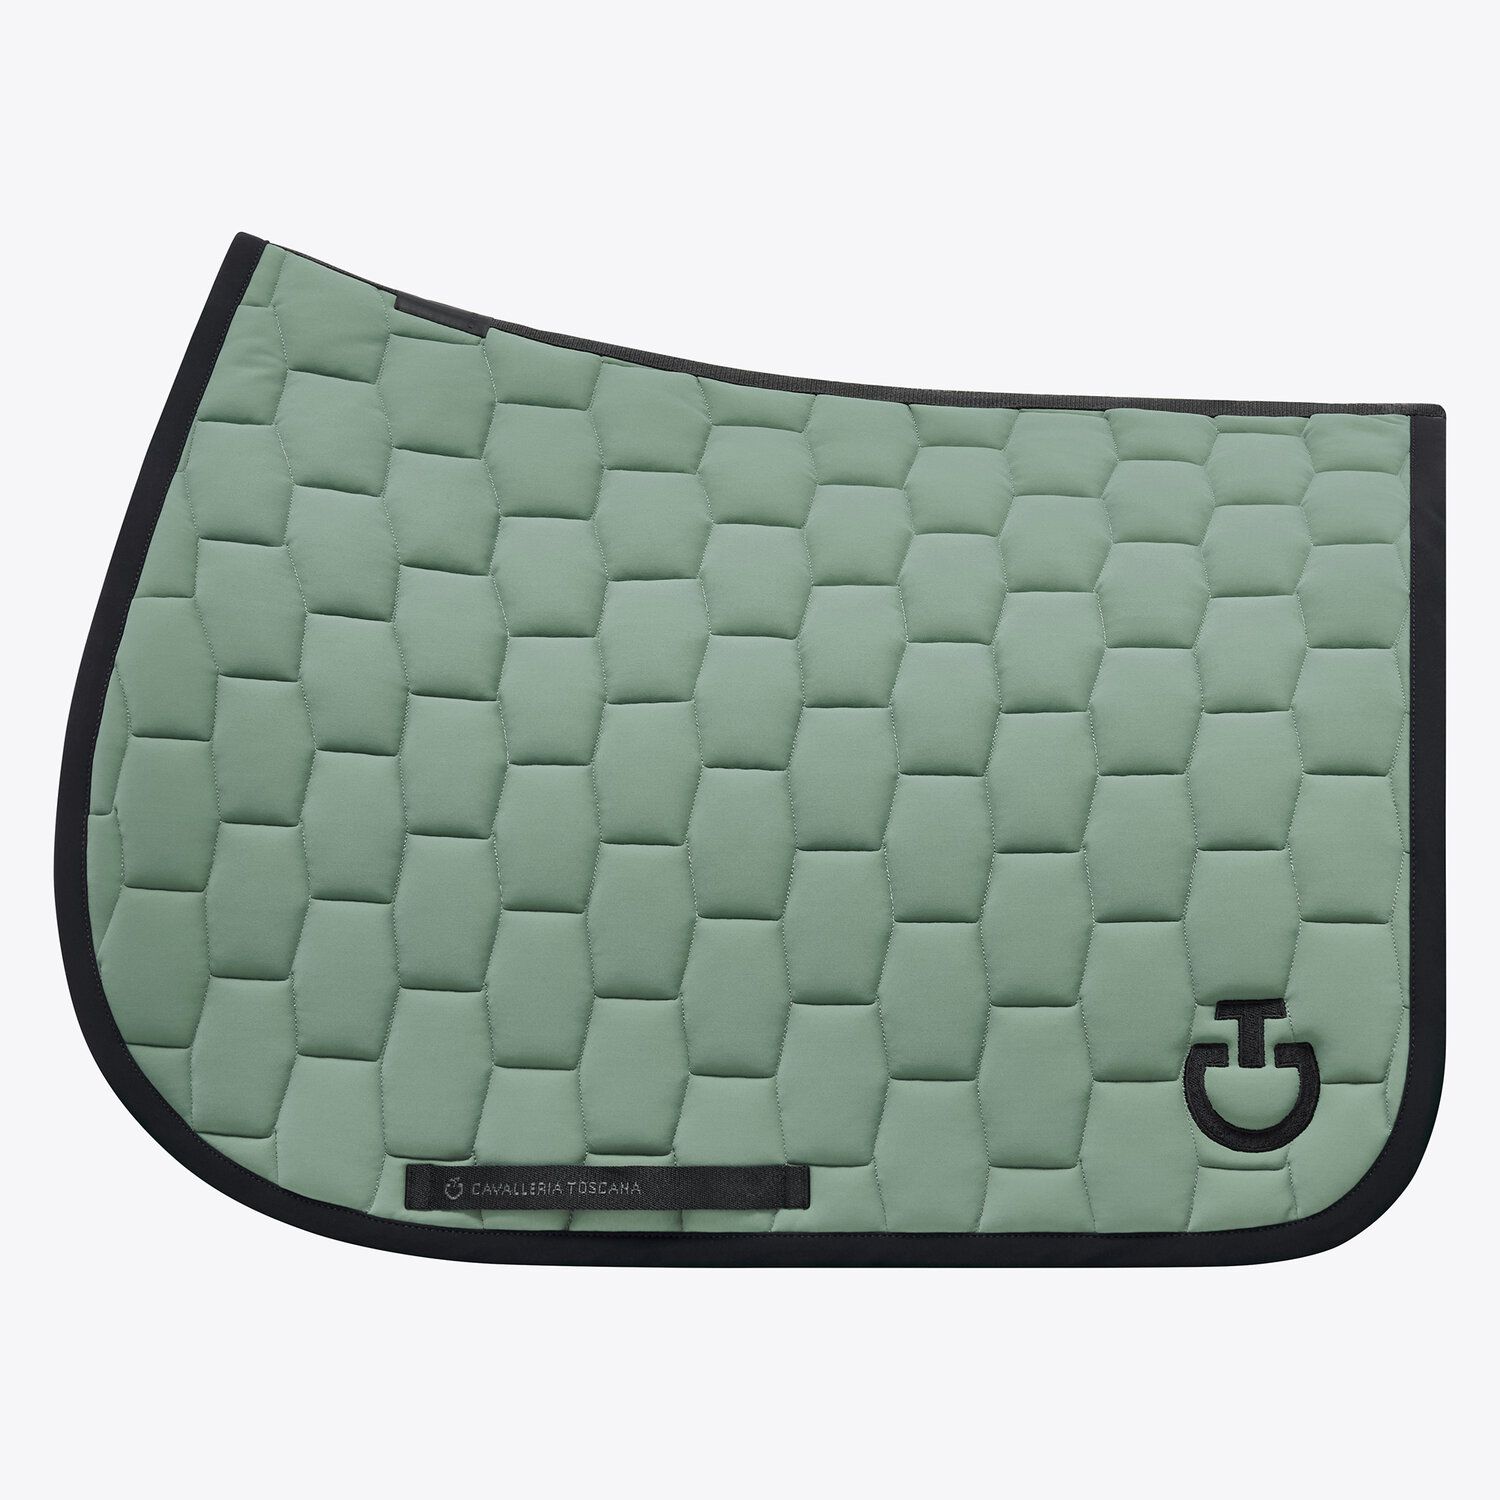 Cavalleria Toscana Quilted cotton saddle pad EMERALD GREY-1